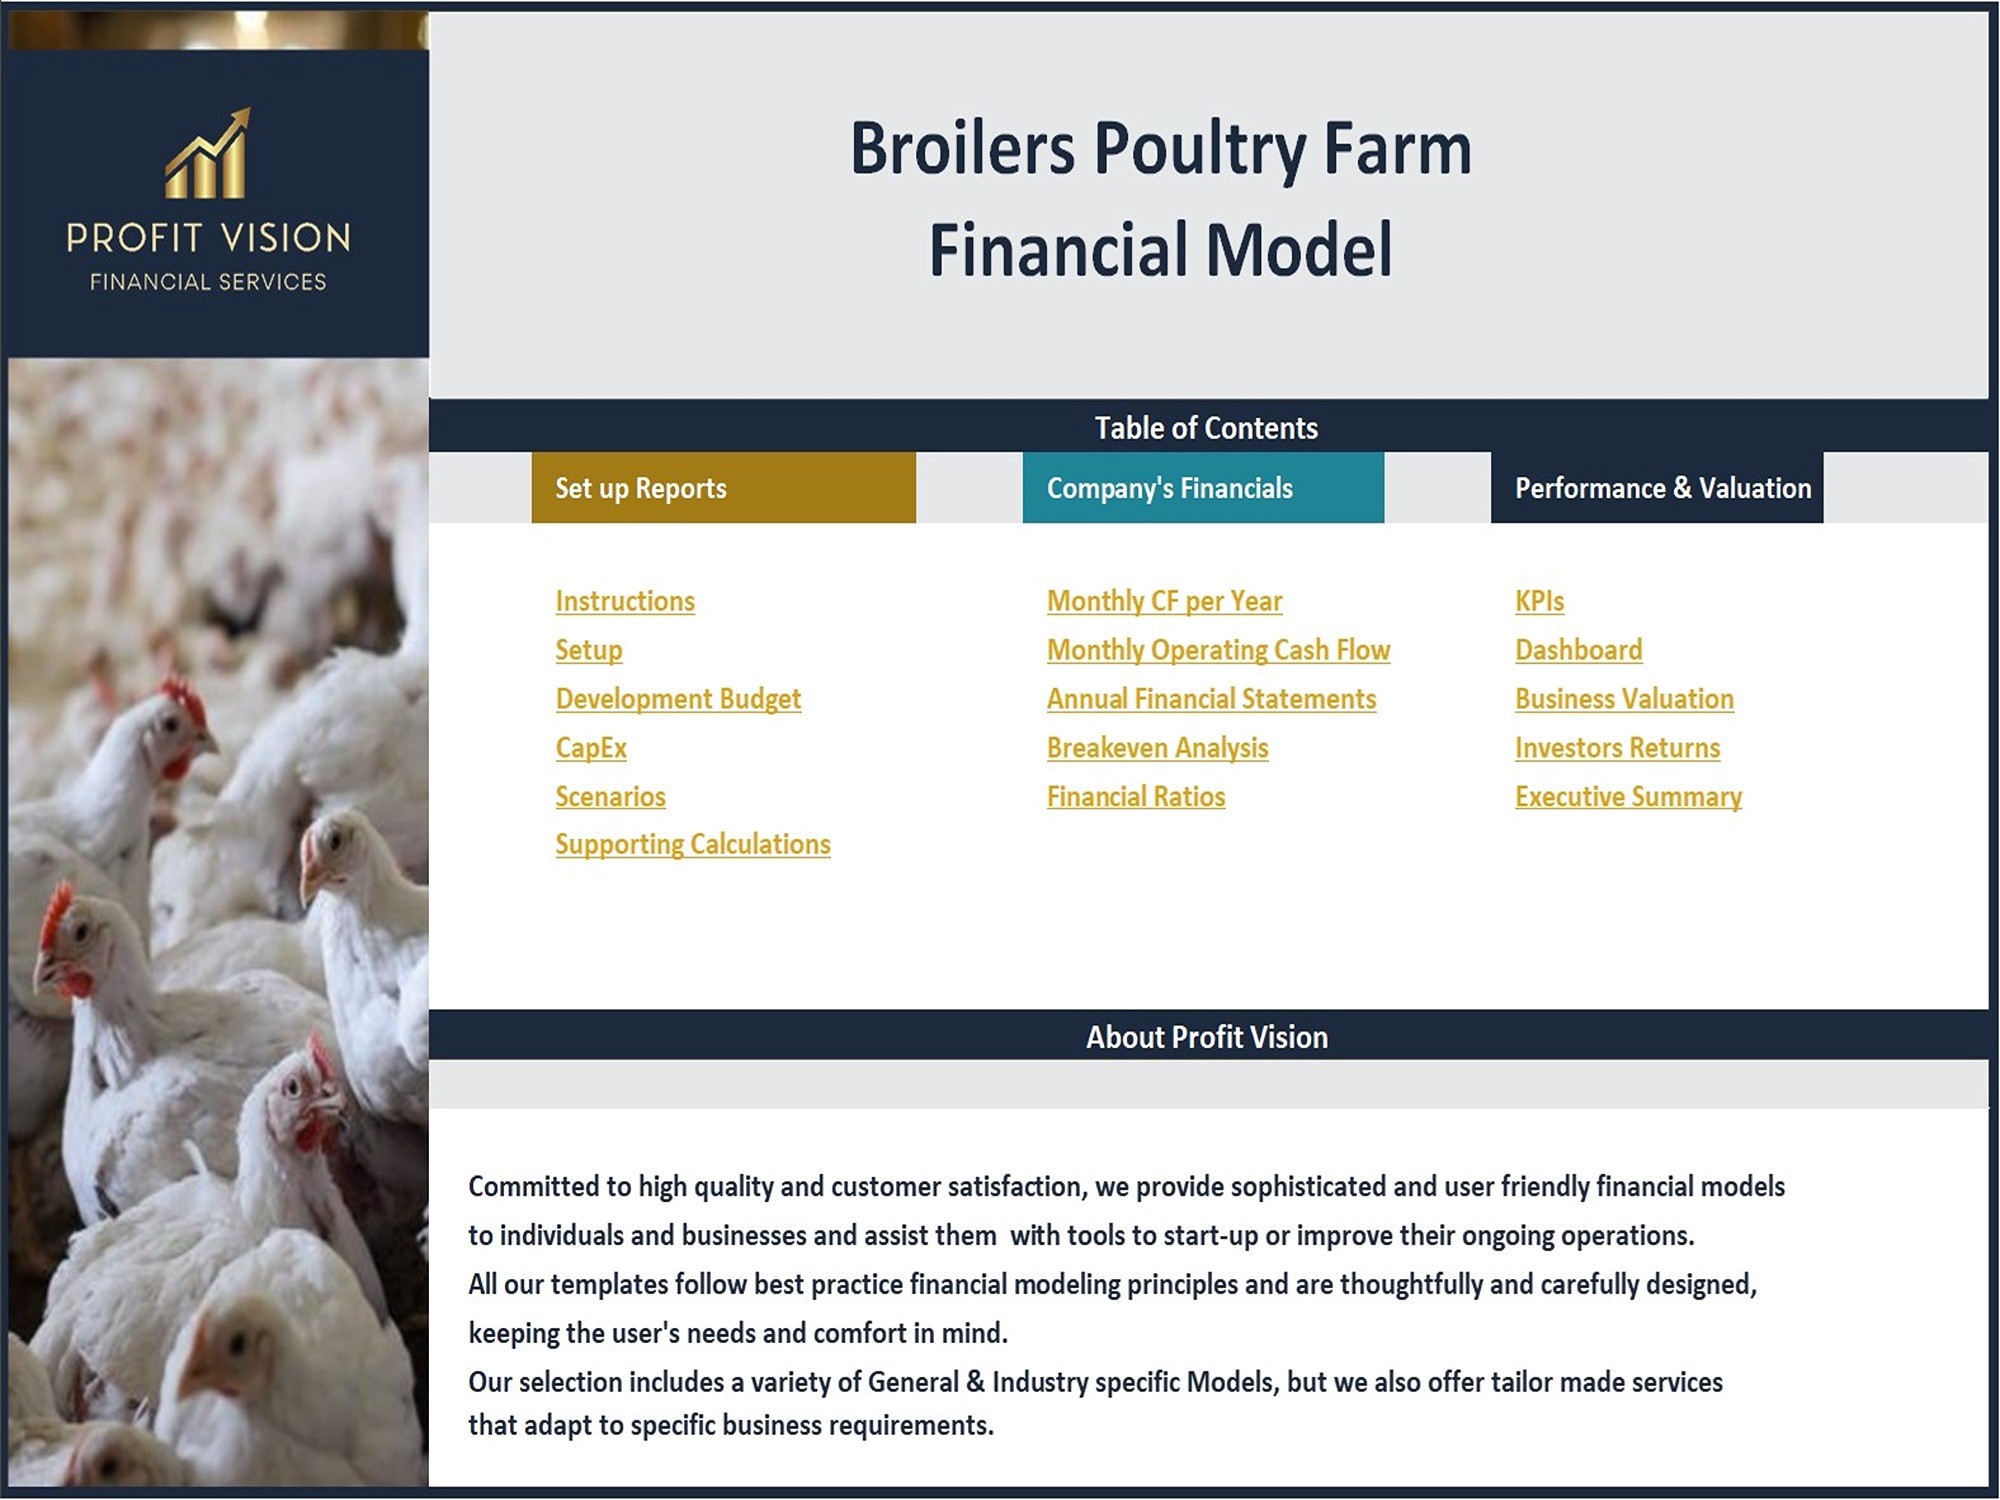 Broilers Poultry Farm – 10 Year Financial Model (Excel template (XLSX)) Preview Image